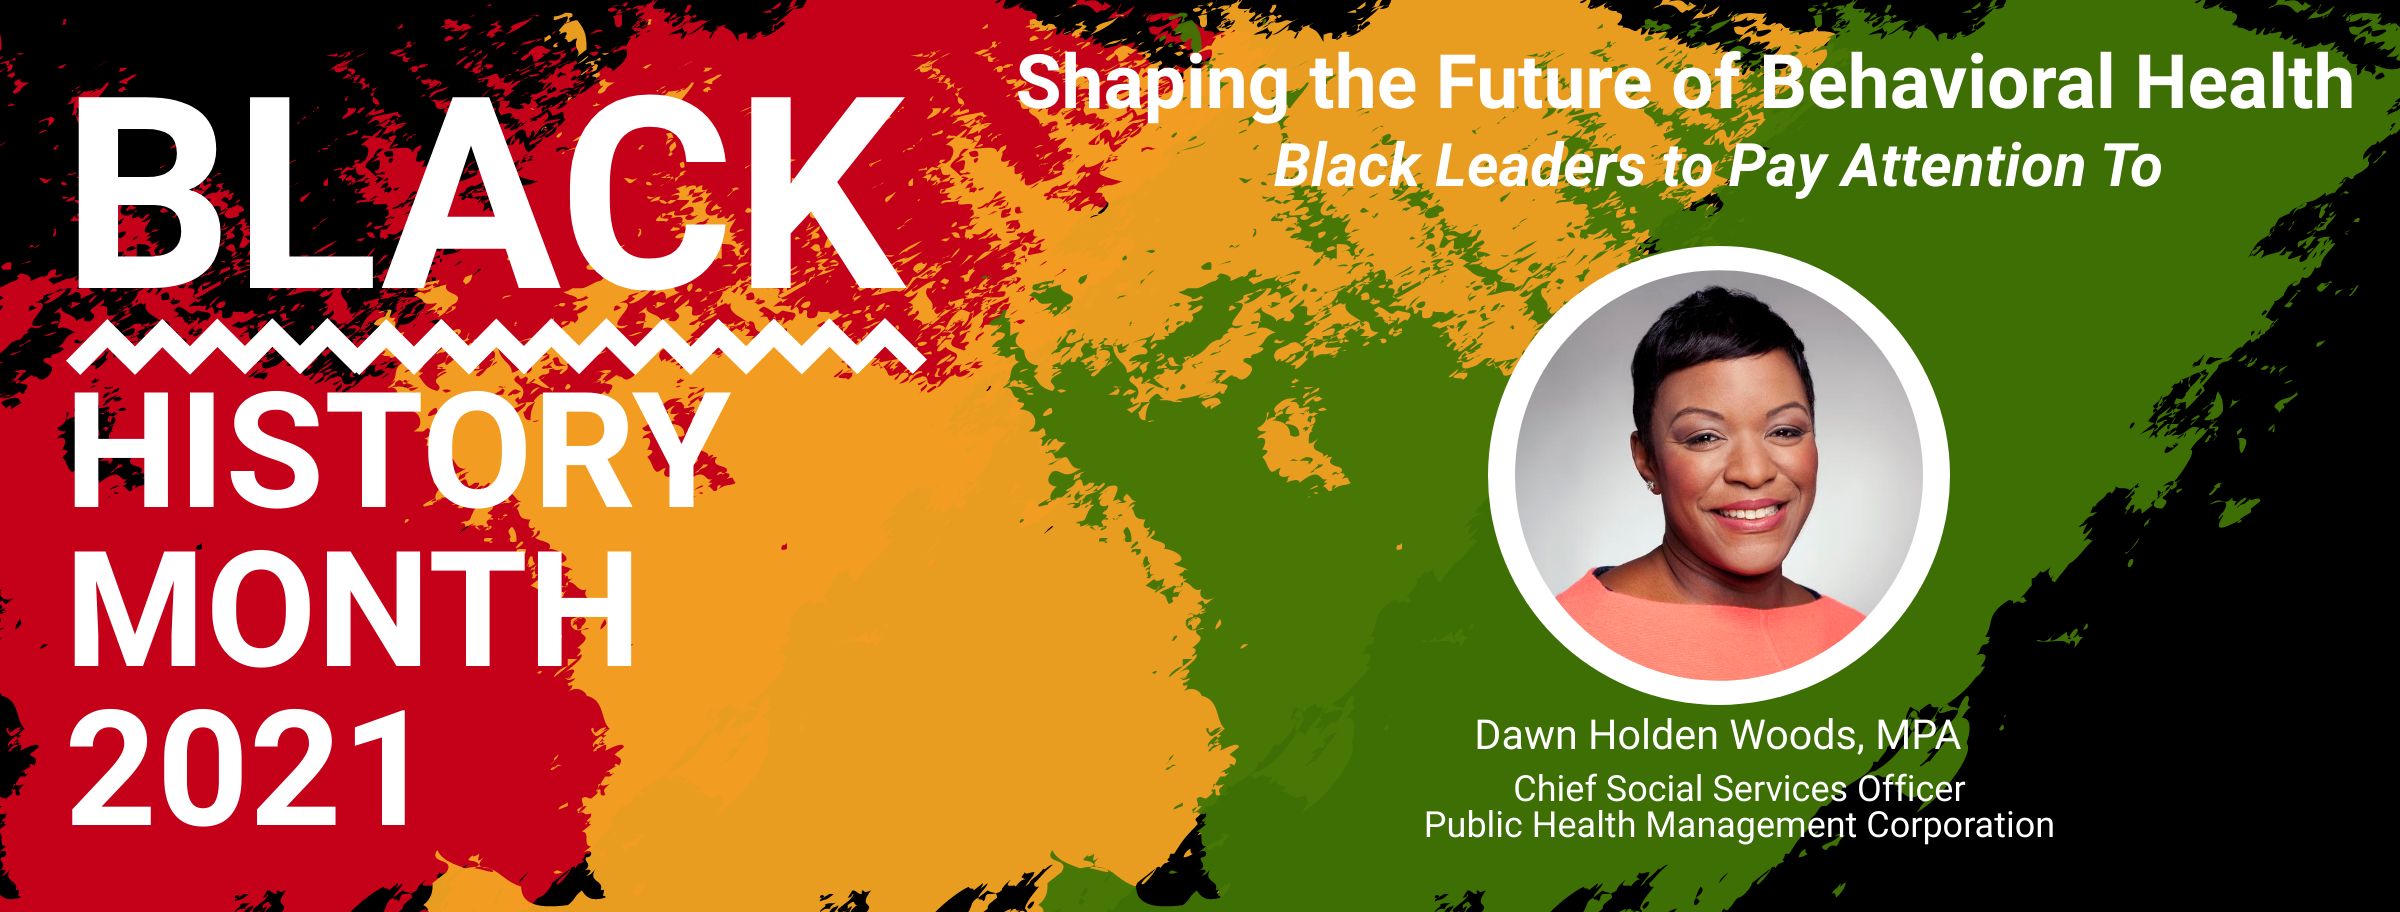 Black Leaders Shaping the Future of Behavioral Health: Dawn Holden Woods, MPA